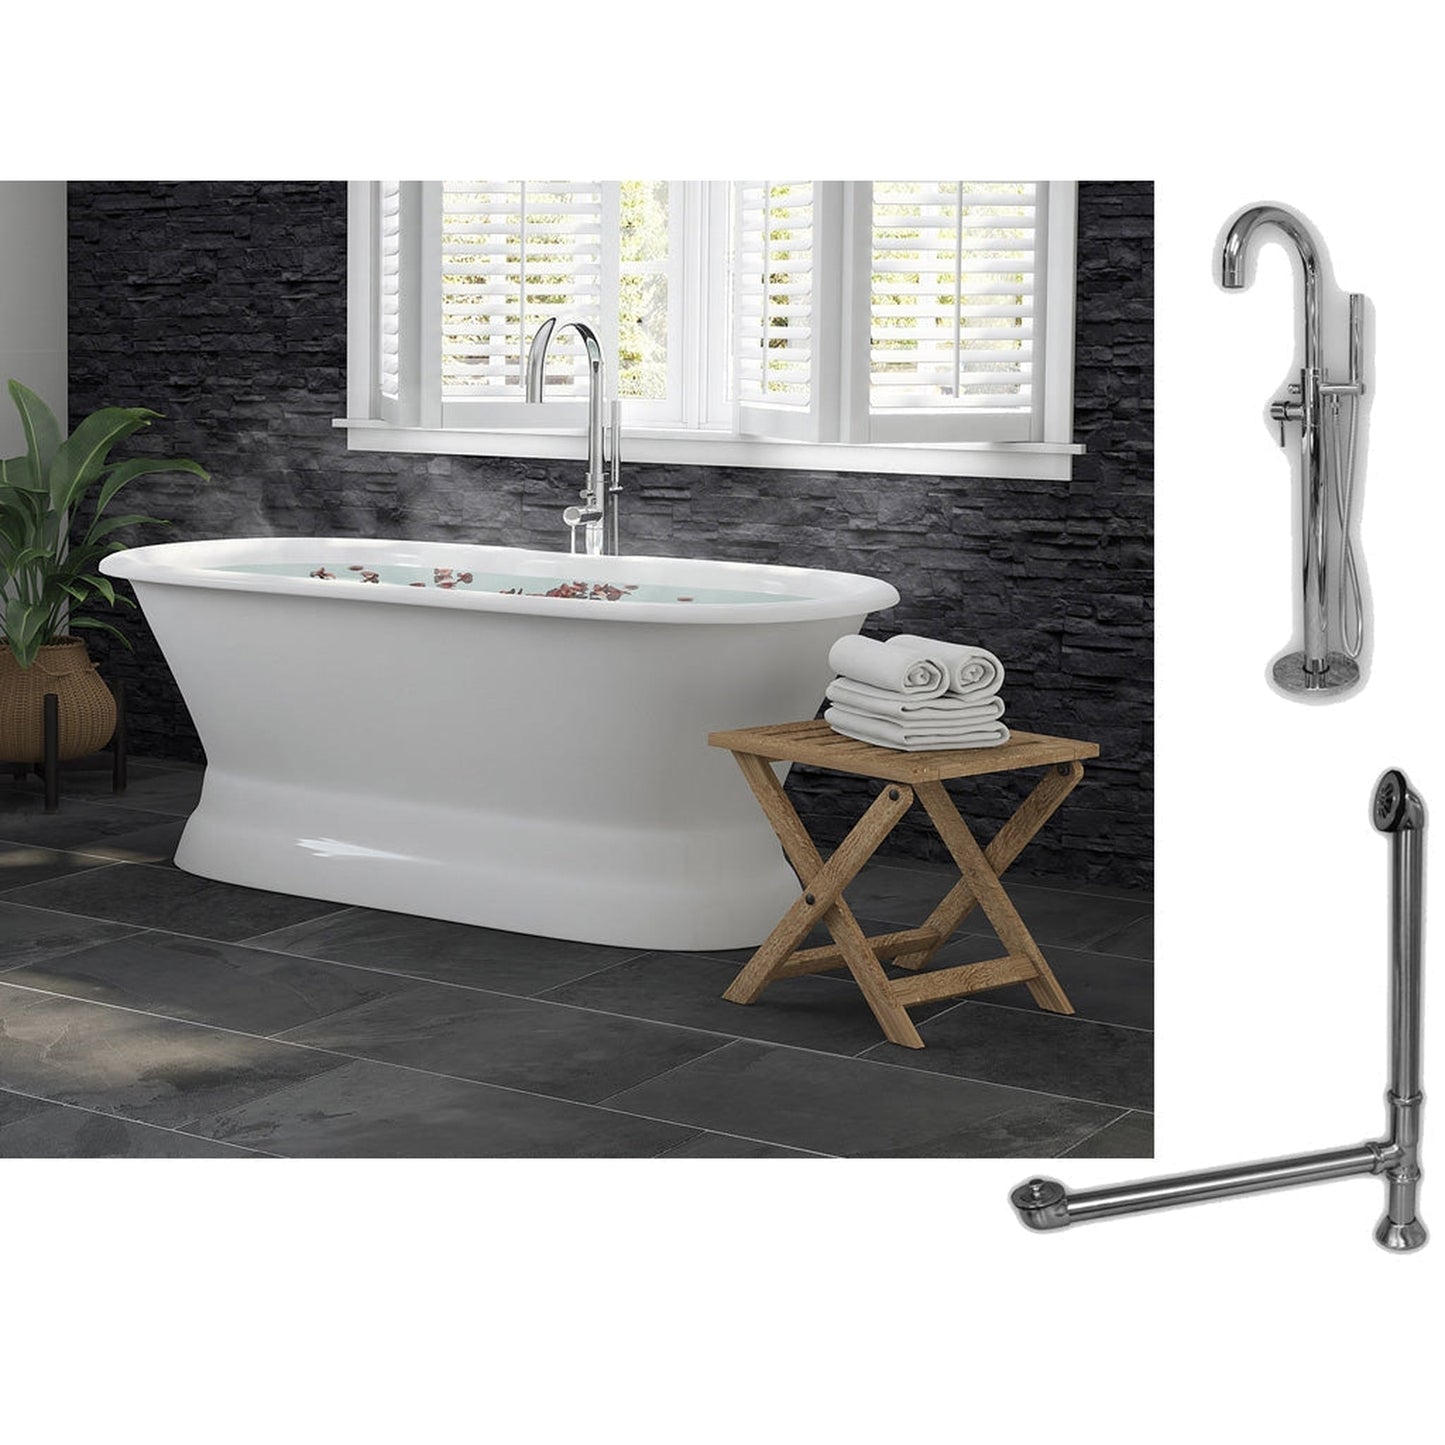 Cambridge Plumbing 66" White Cast Iron Double Ended Pedestal Bathtub With No Deck Holes And Complete Plumbing Package Including Modern Floor Mounted Faucet, Drain And Overflow Assembly In Polished Chrome